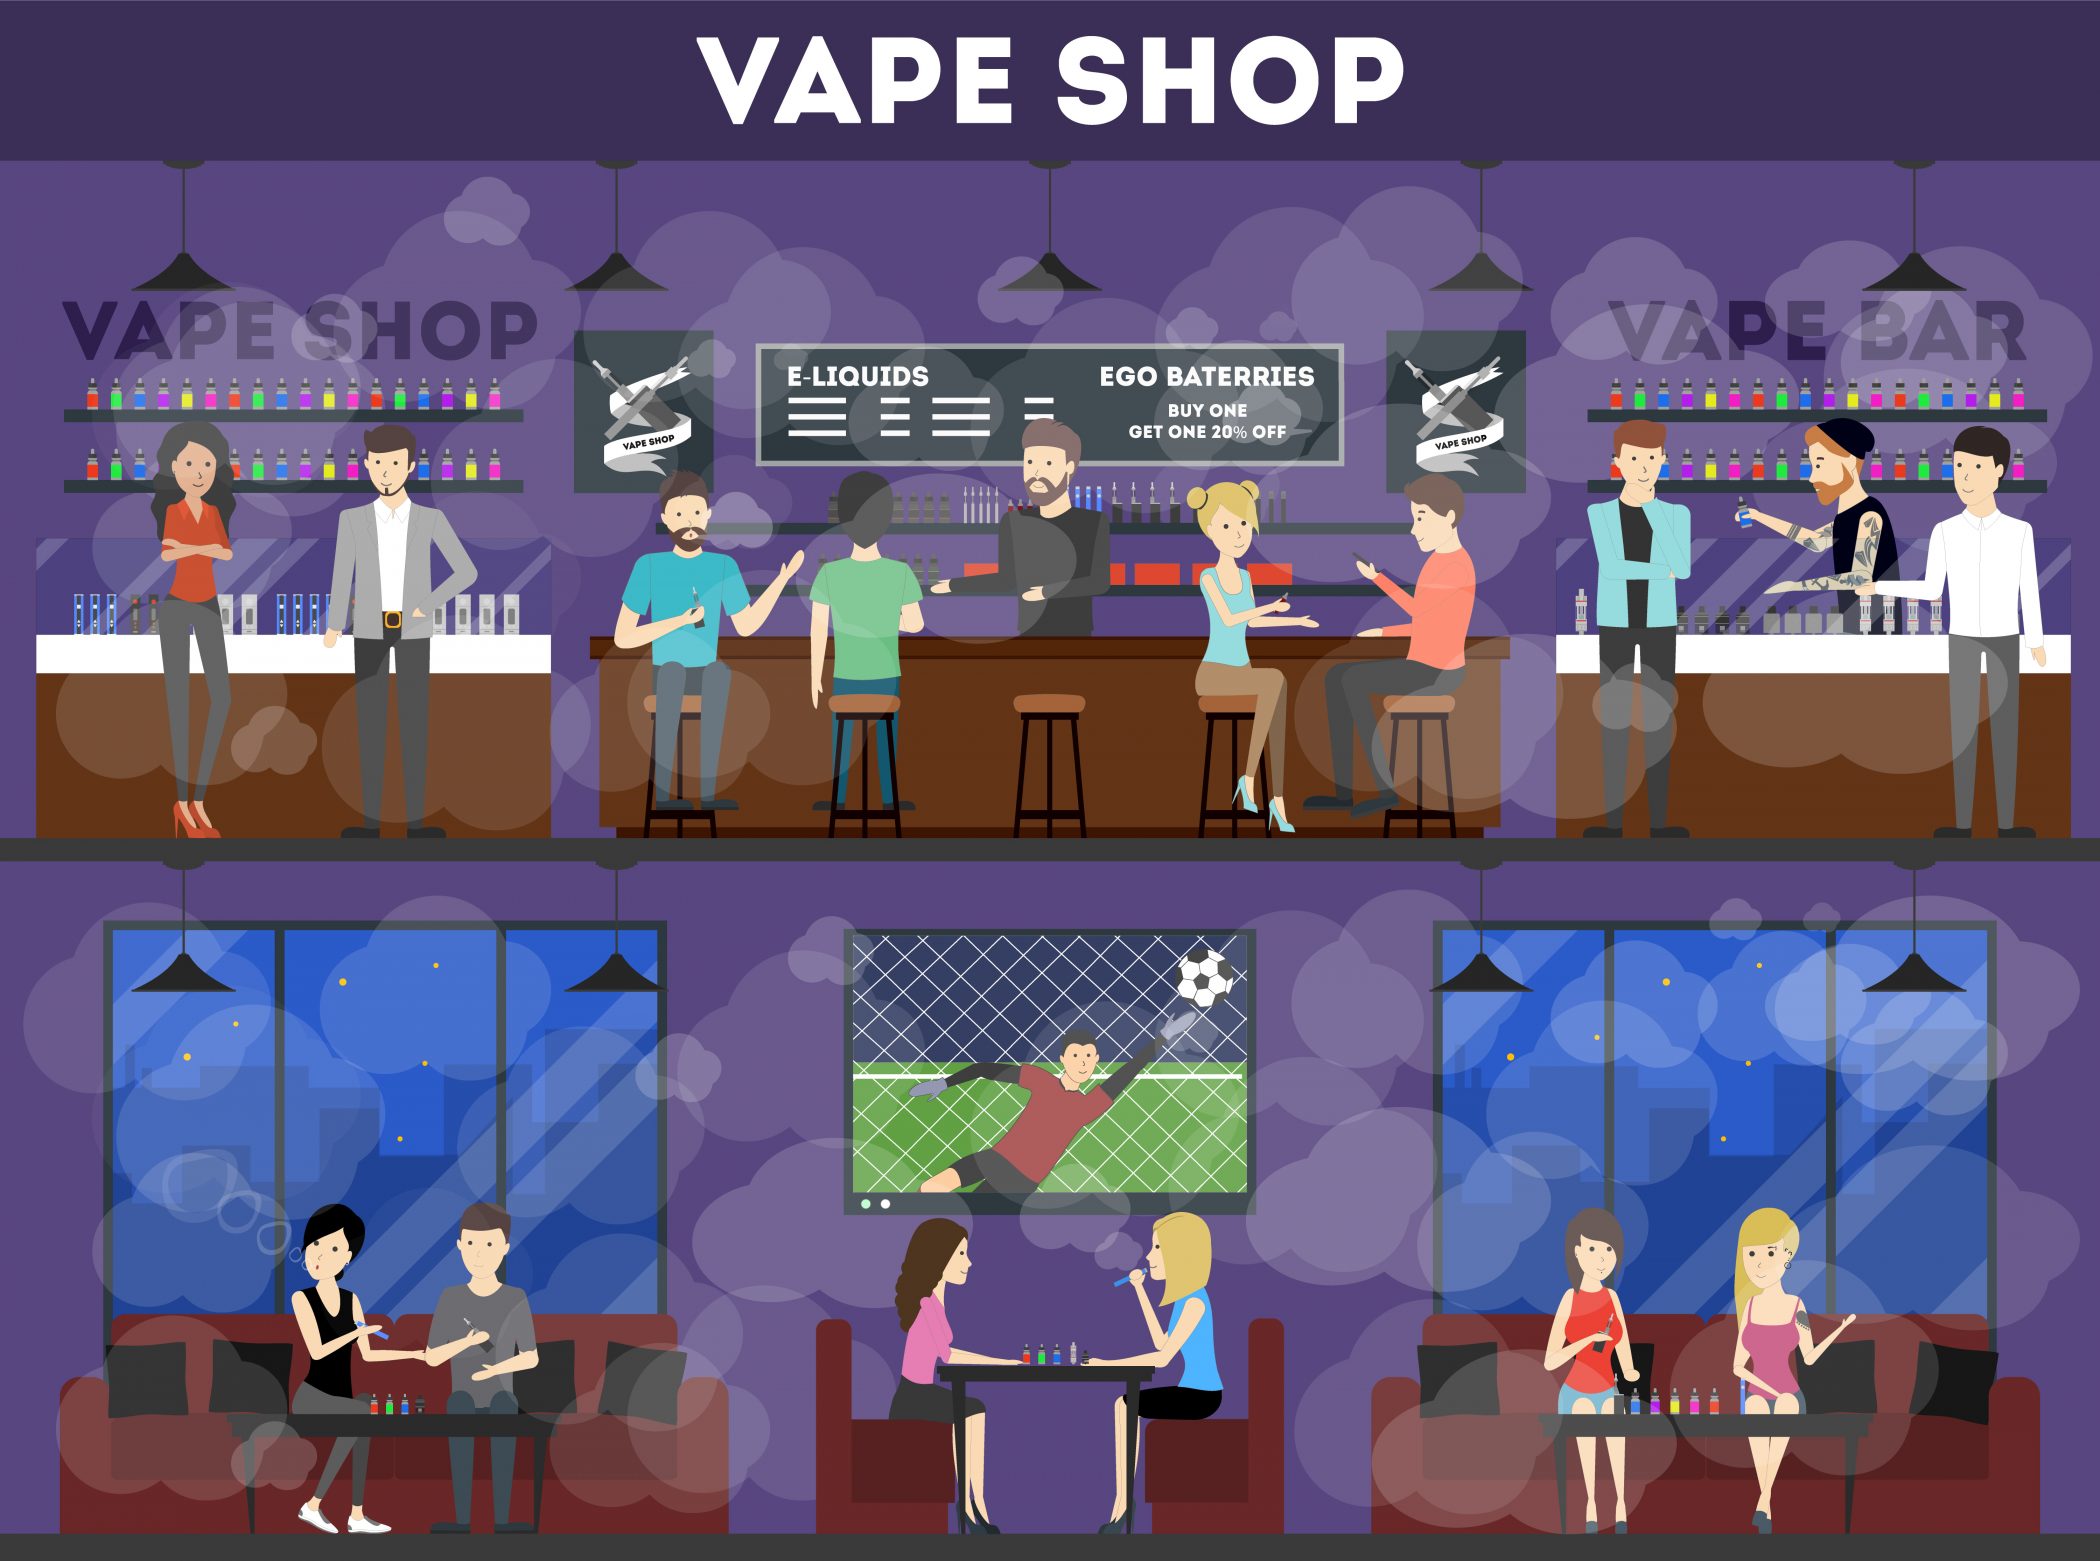 Vaping shops with customers